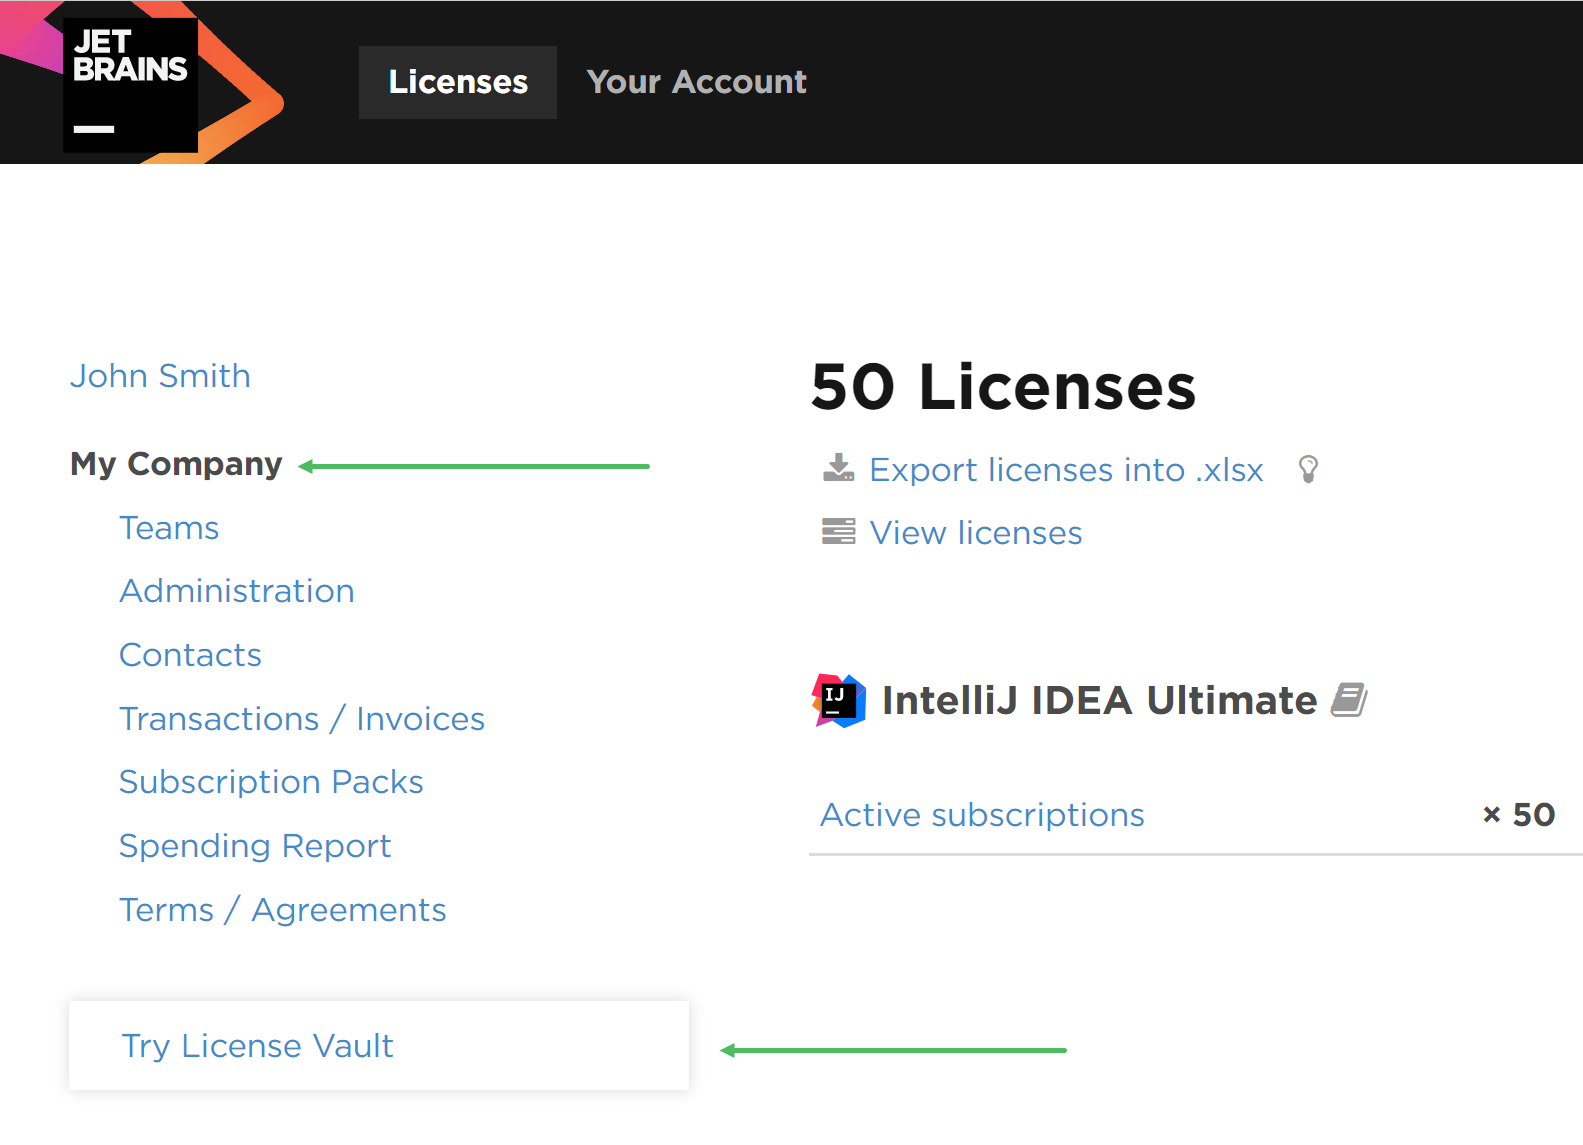 How to locate the button to try License Vault in your JetBrains Account